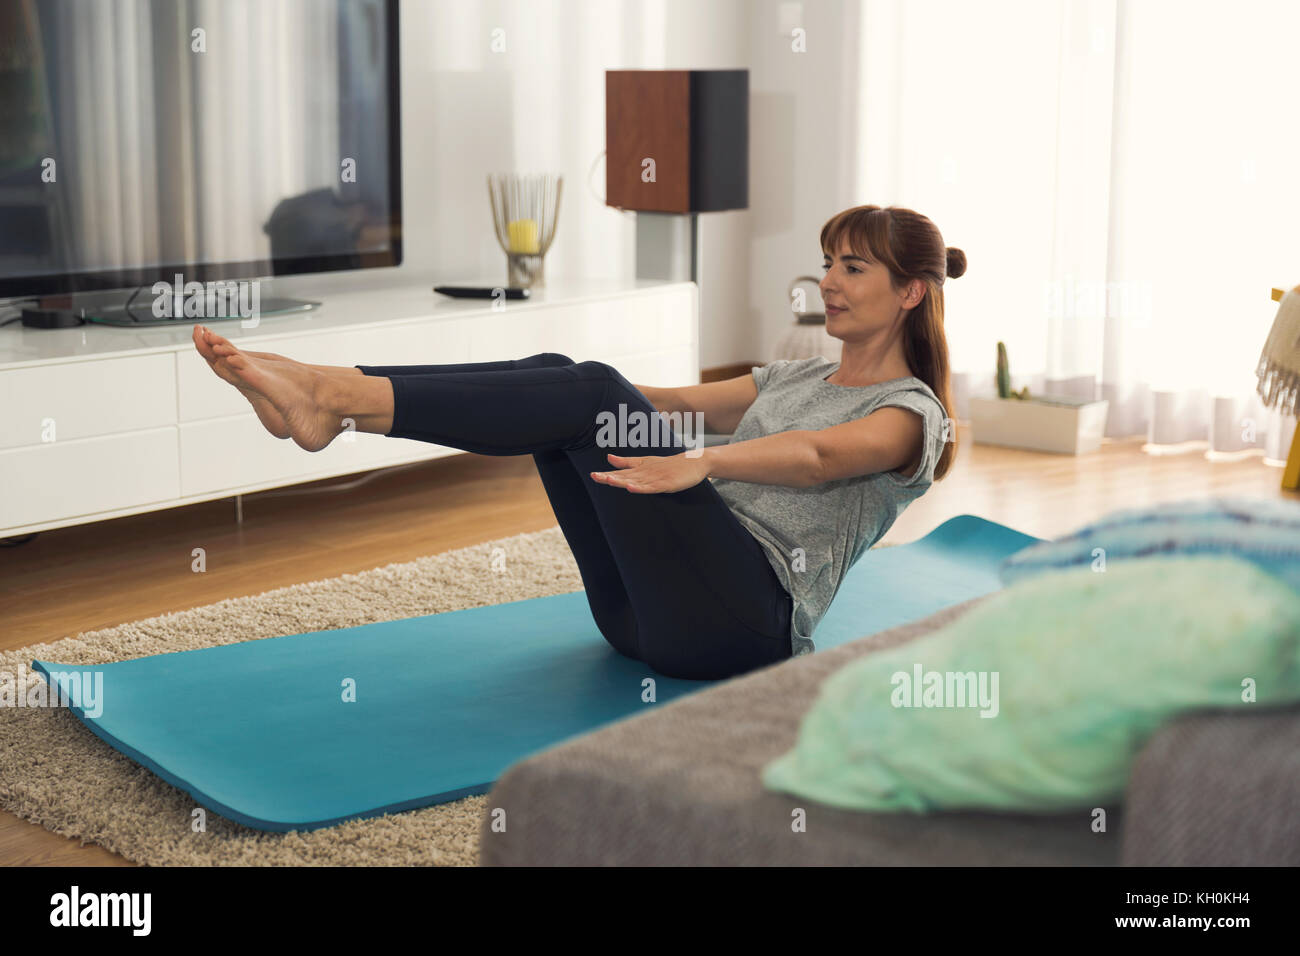 Full length shot of a woman doing exercise at home Stock Photo